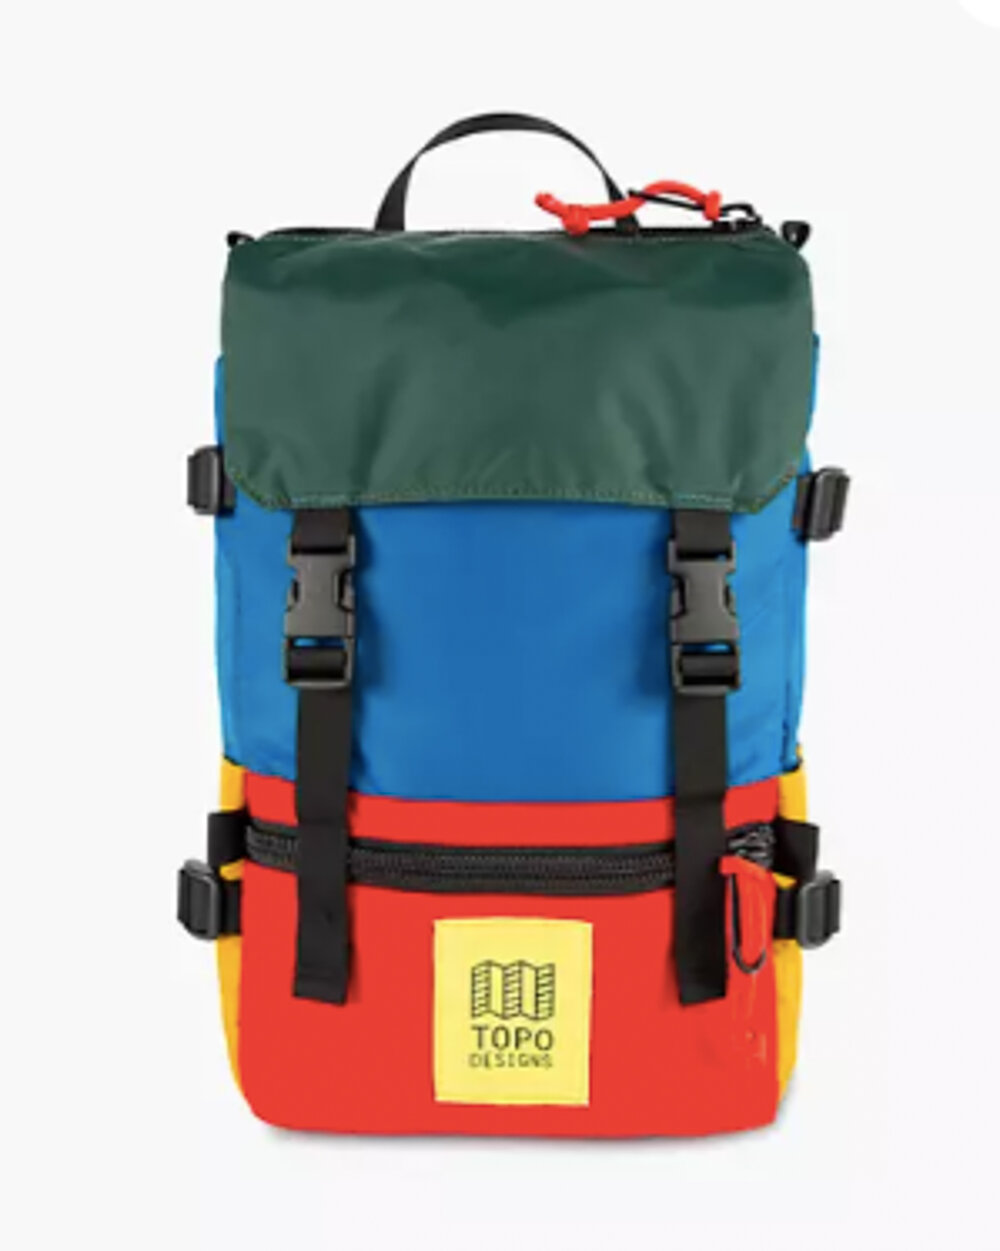 (6) Topo Designs Rover Pack Mini Backpack